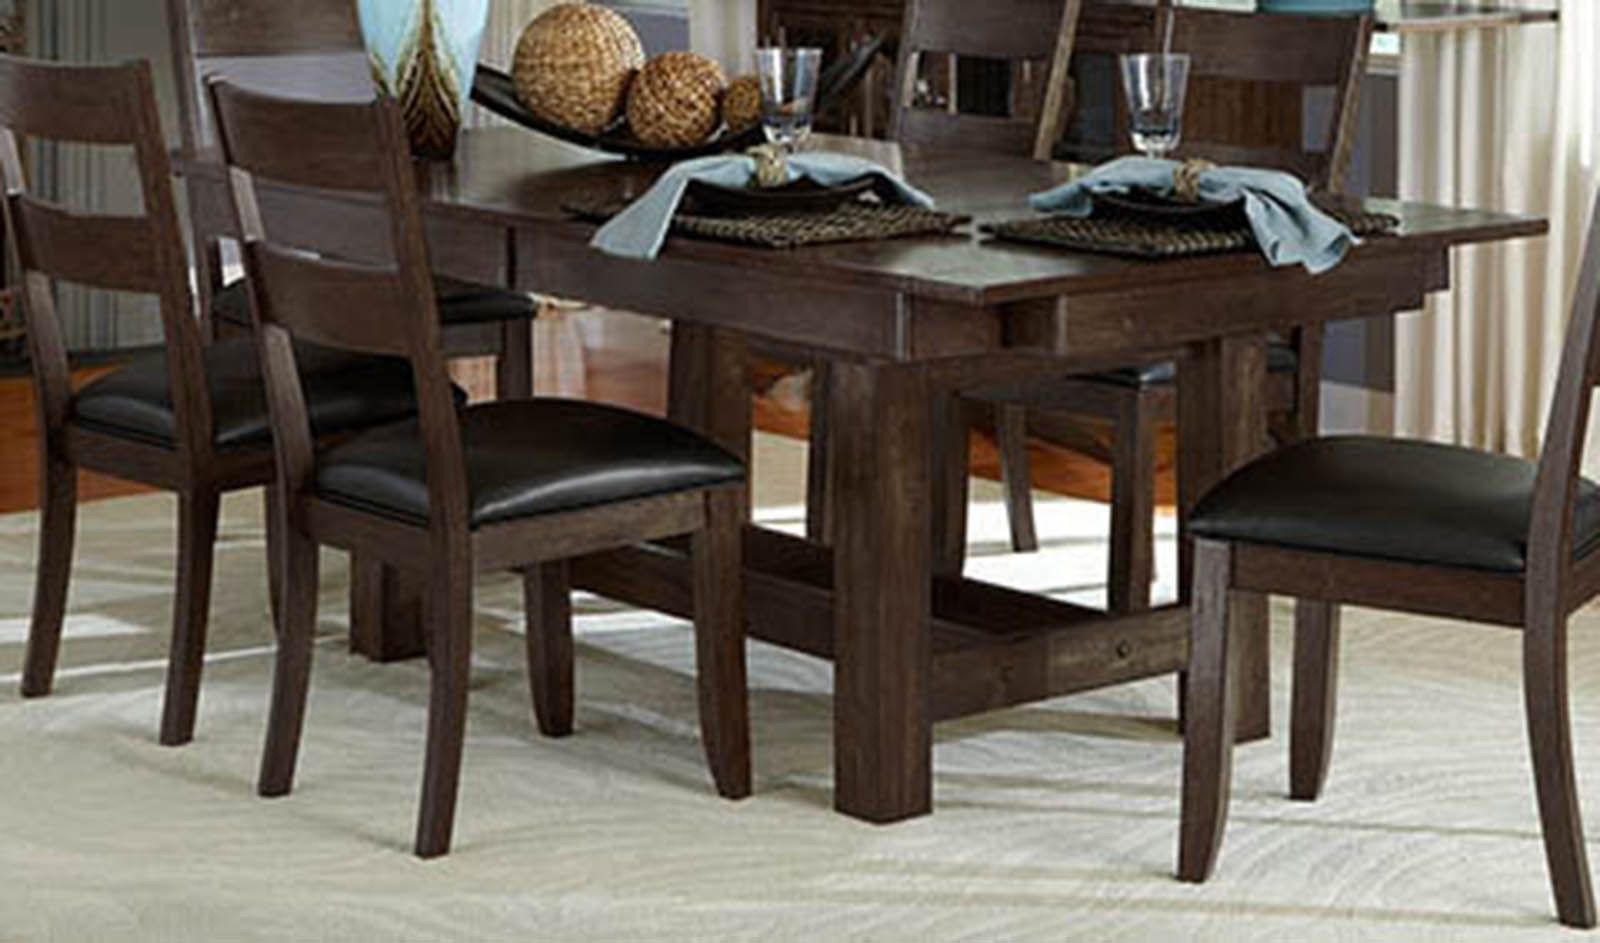 A America Furniture Mariposa Rectangular Trestle Table In Inside Widely Used Nerida Trestle Dining Tables (View 13 of 20)